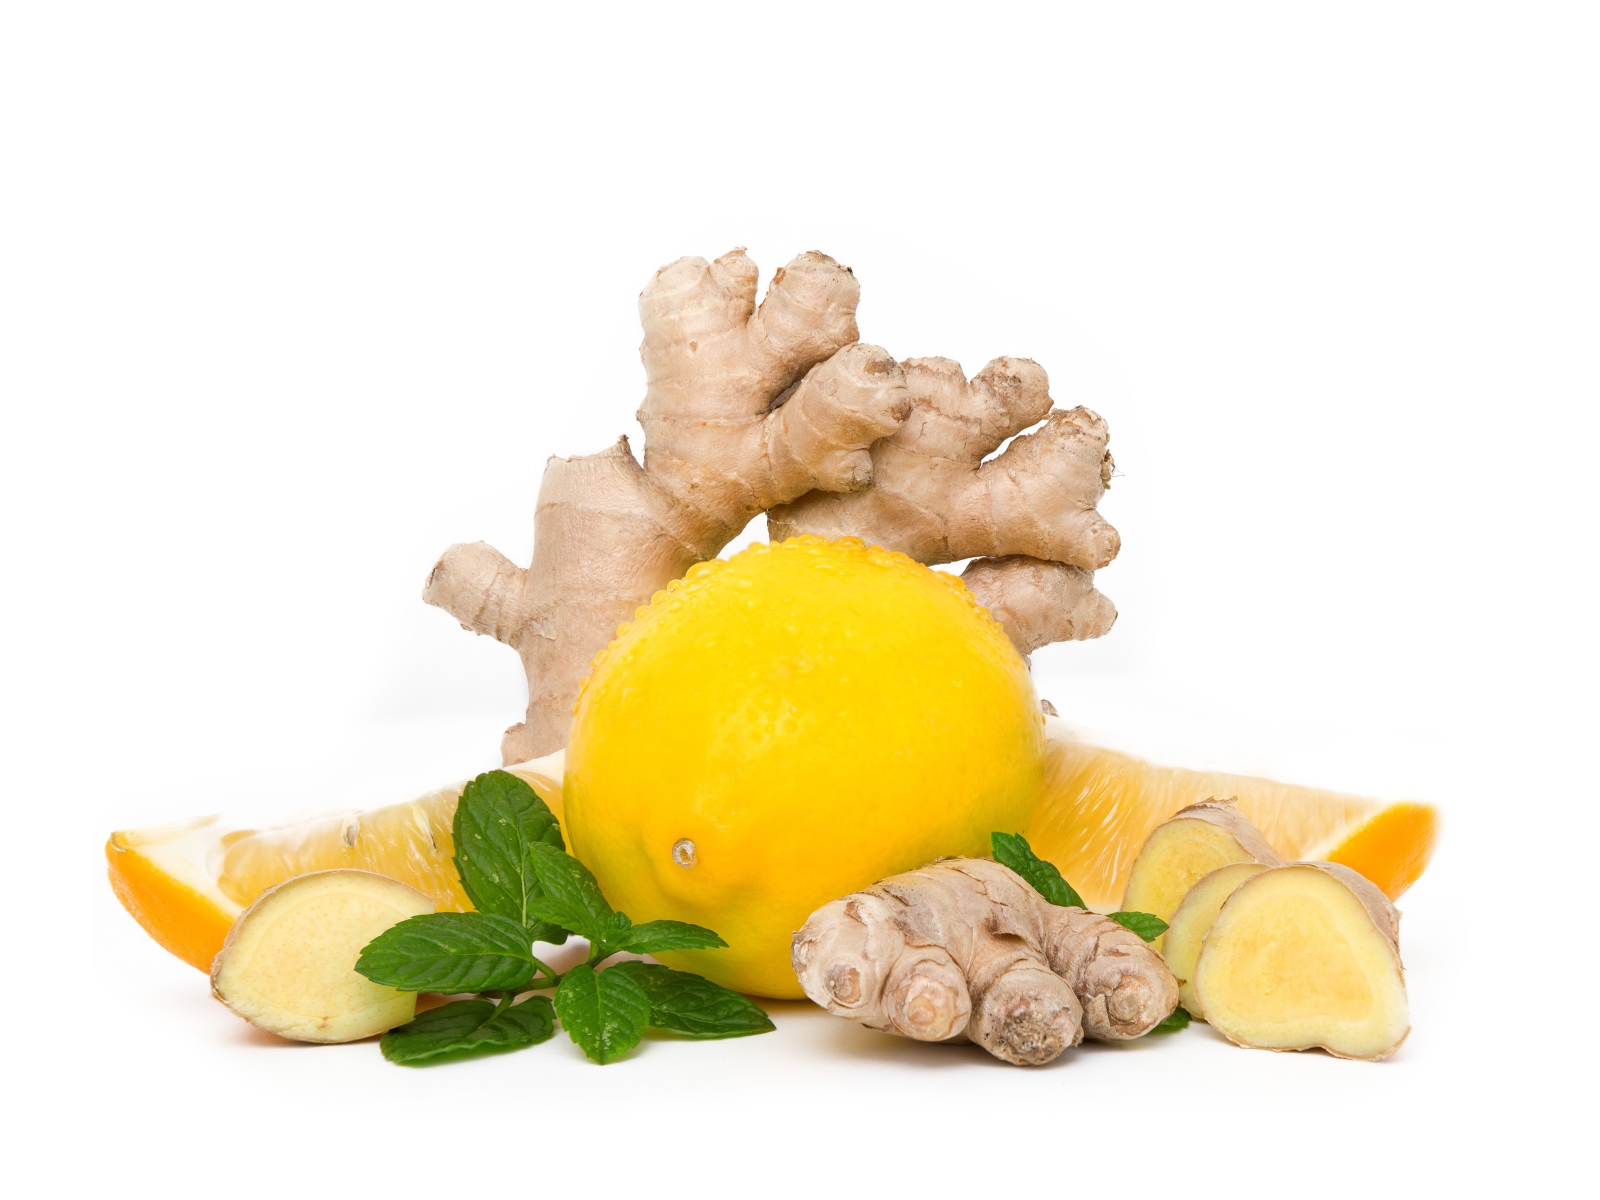 Fresh lemon with ginger root and mint on white background